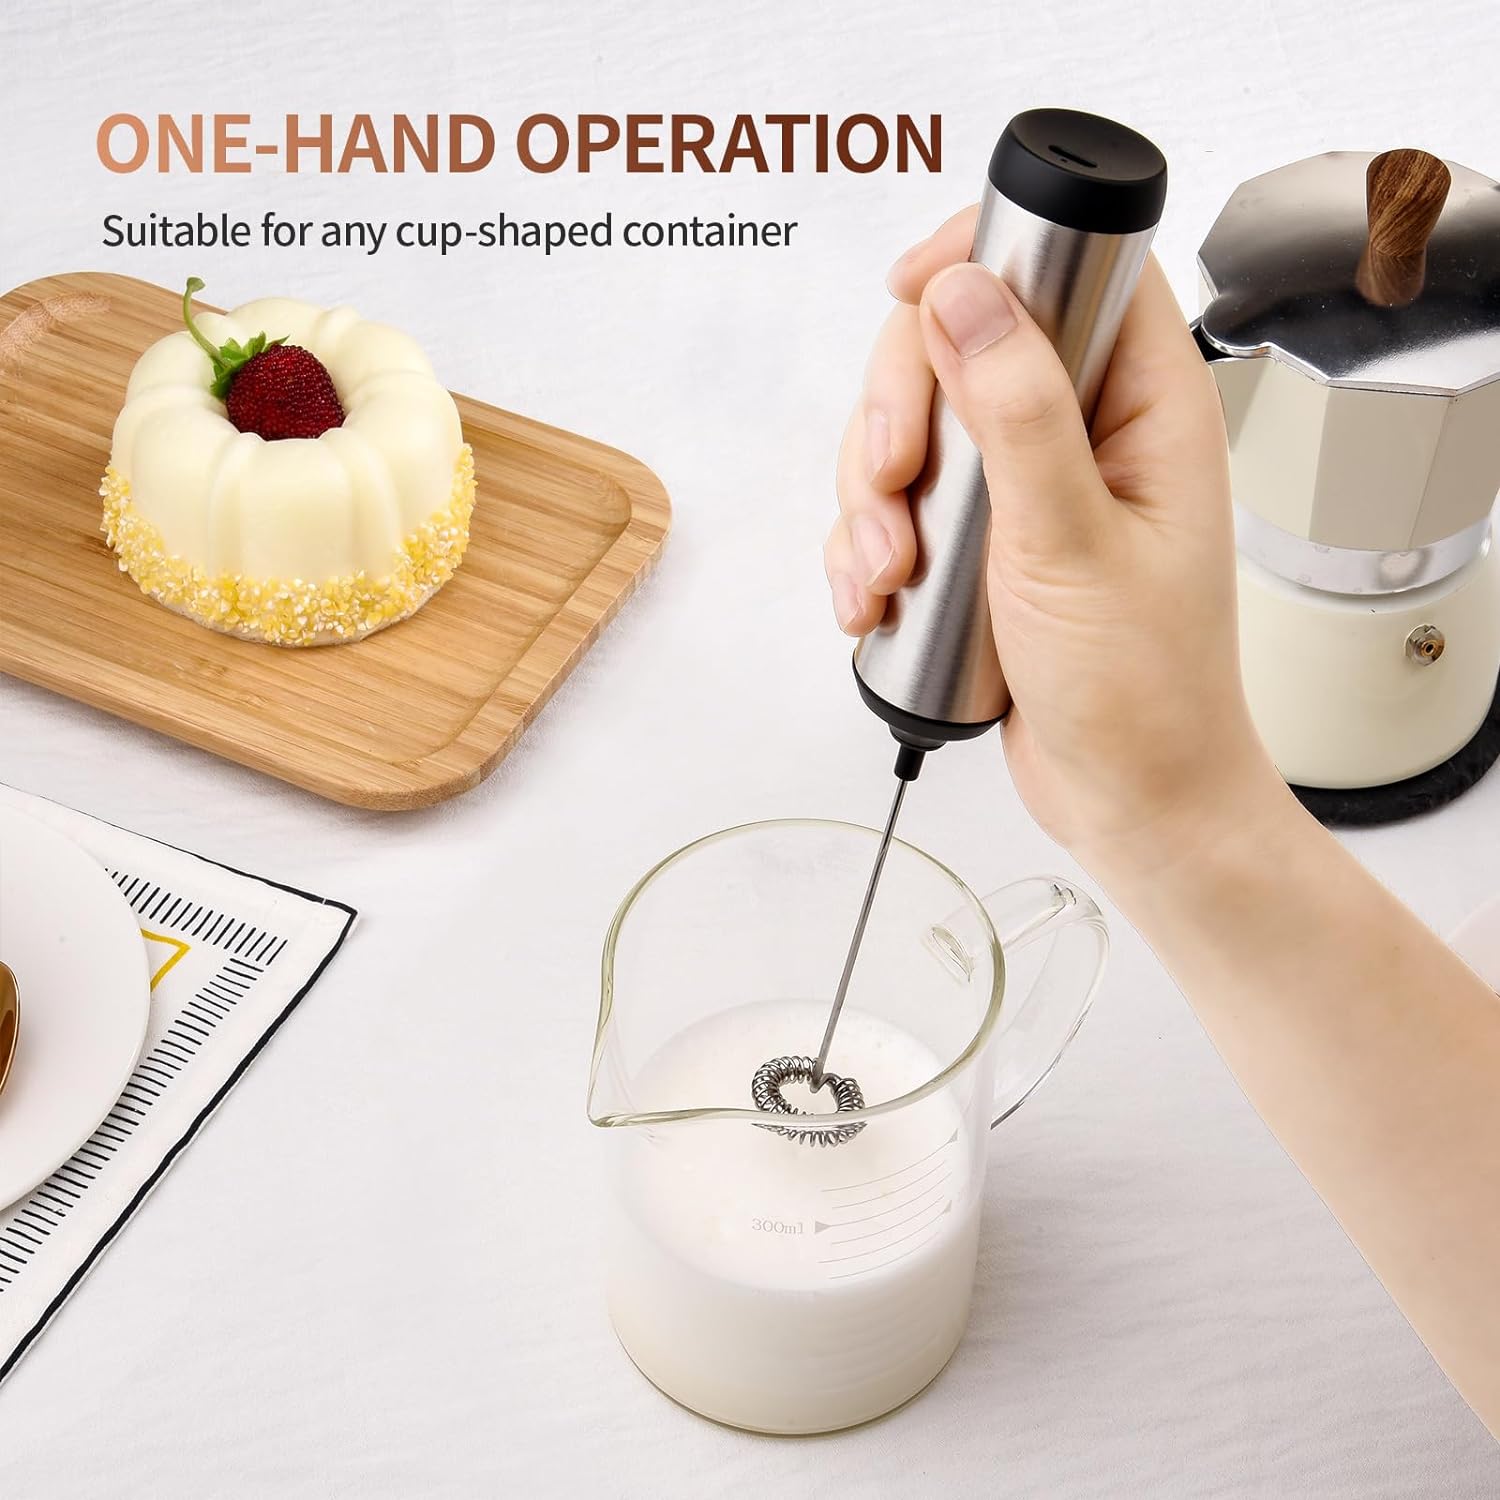 High-quality Electric Milk Frother